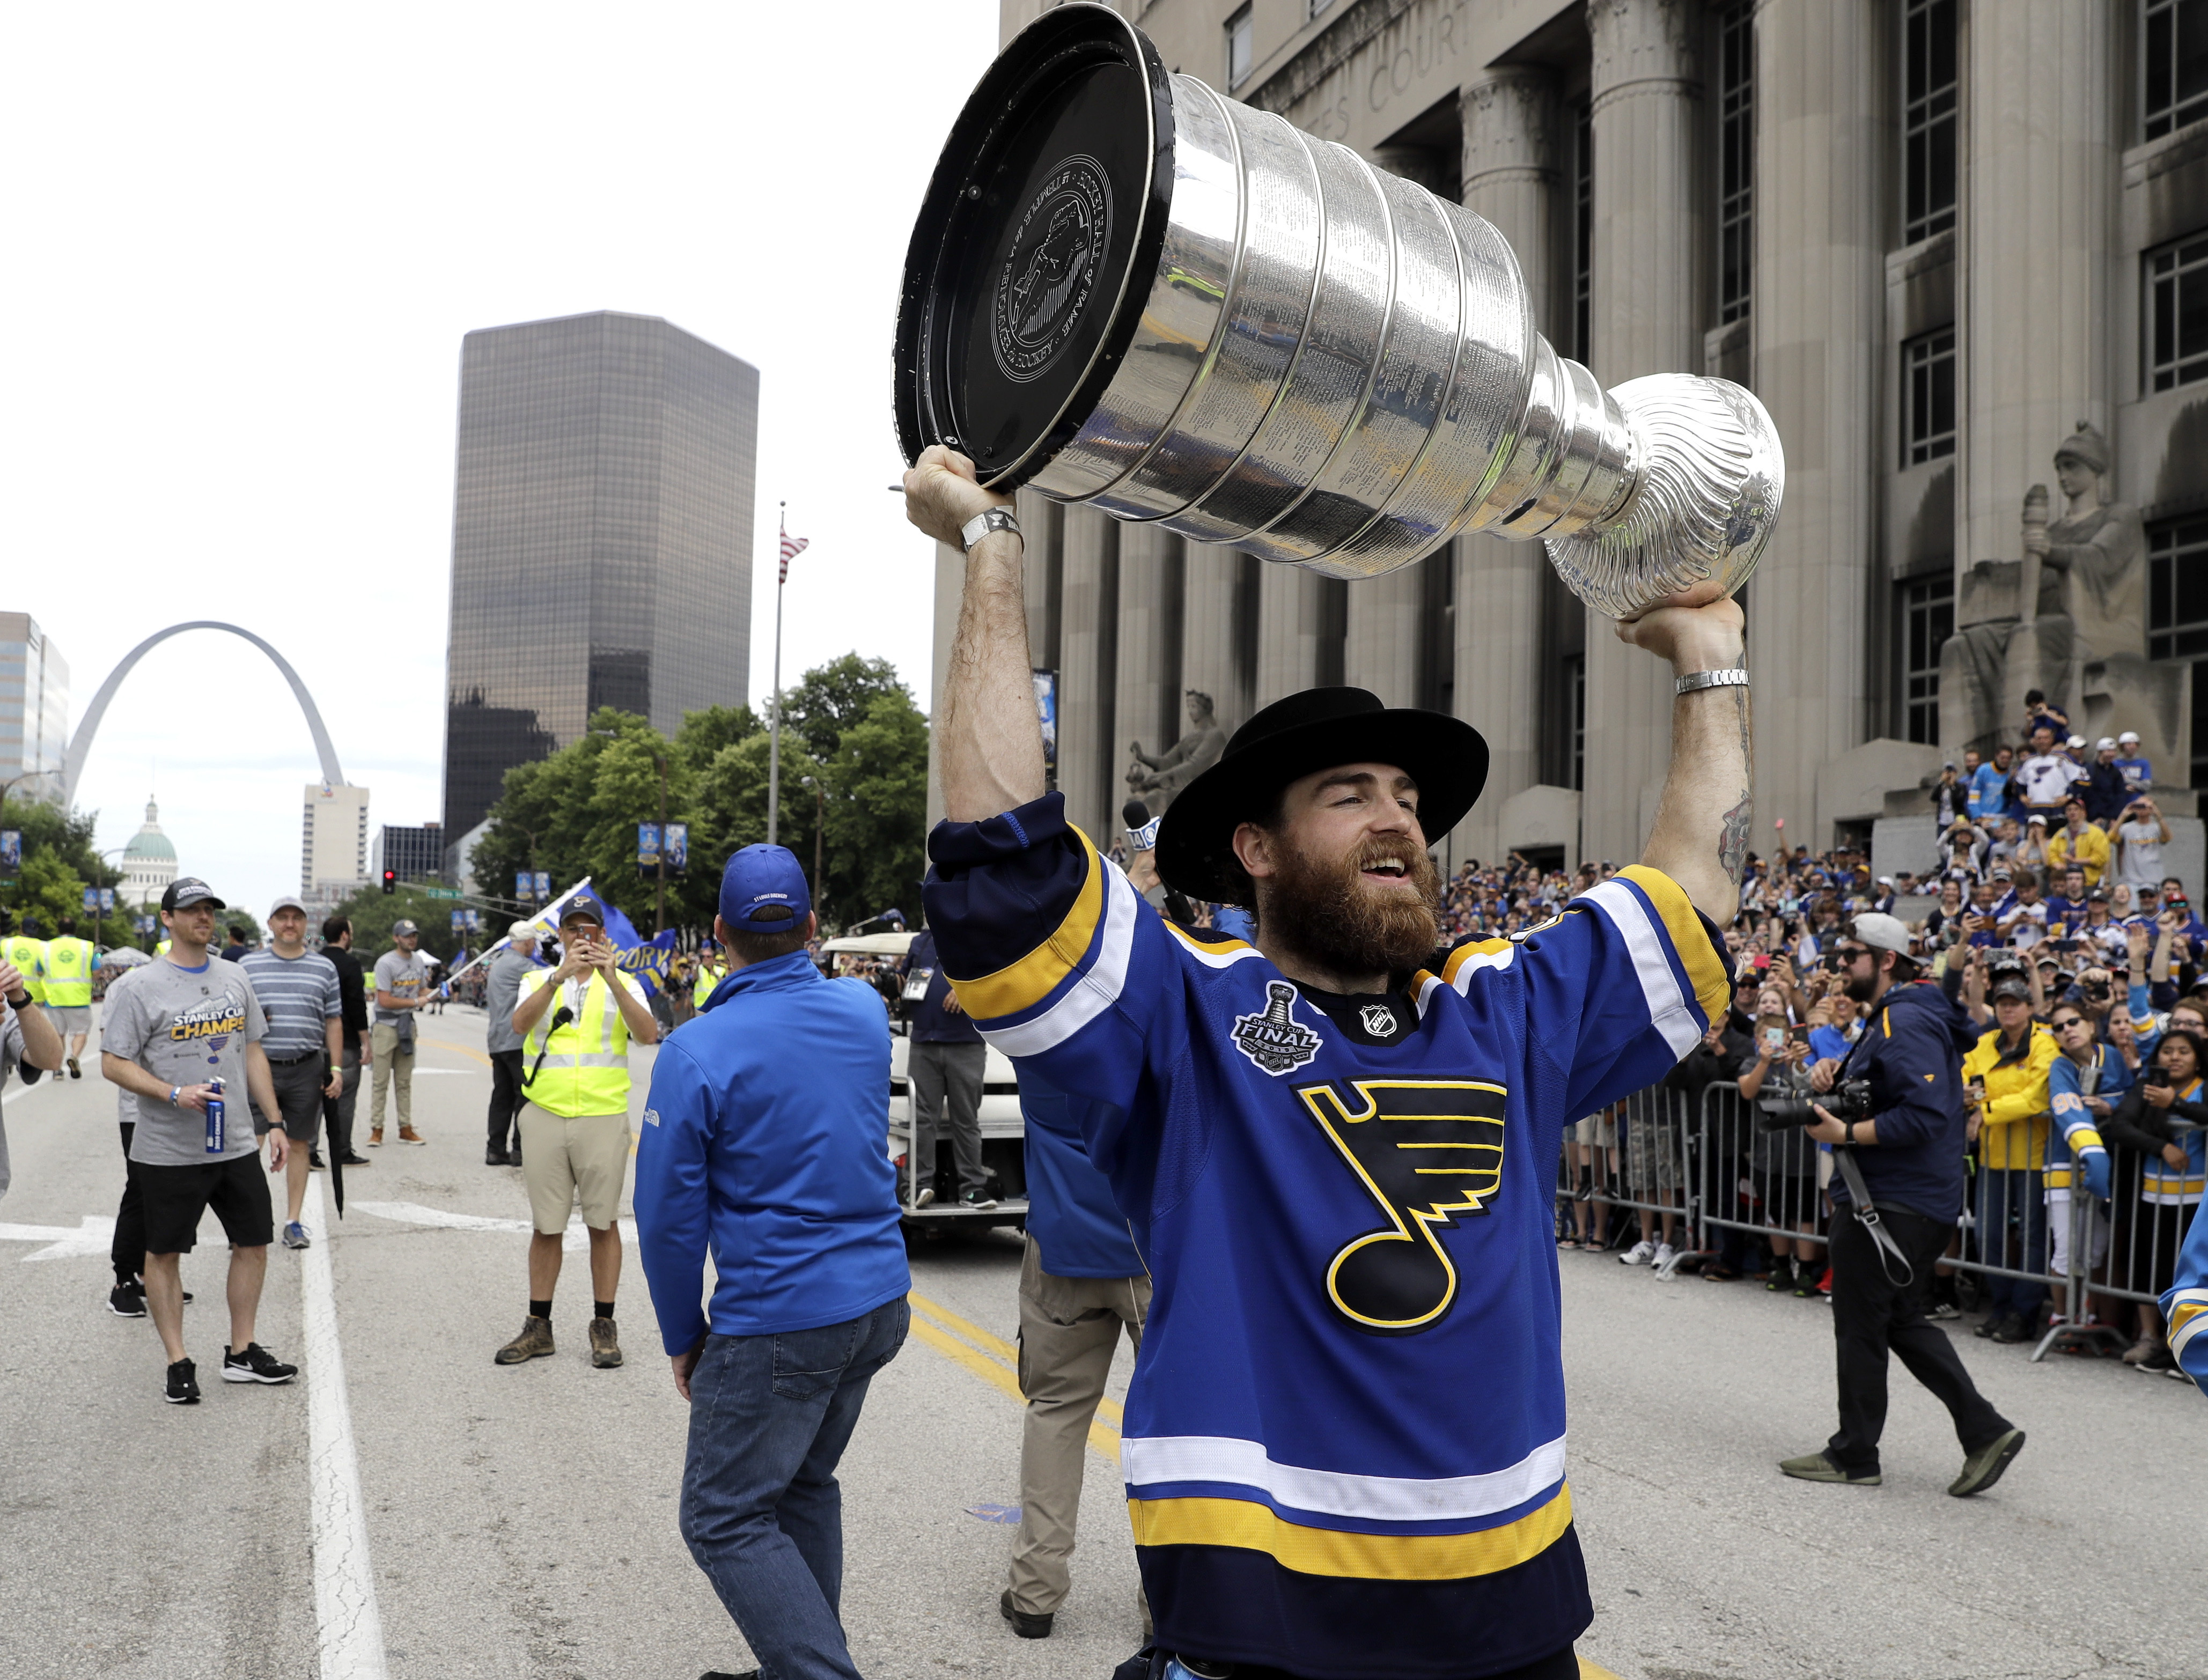 St. Louis Blues: Ryan O'Reilly Is Suddenly A Big Problem